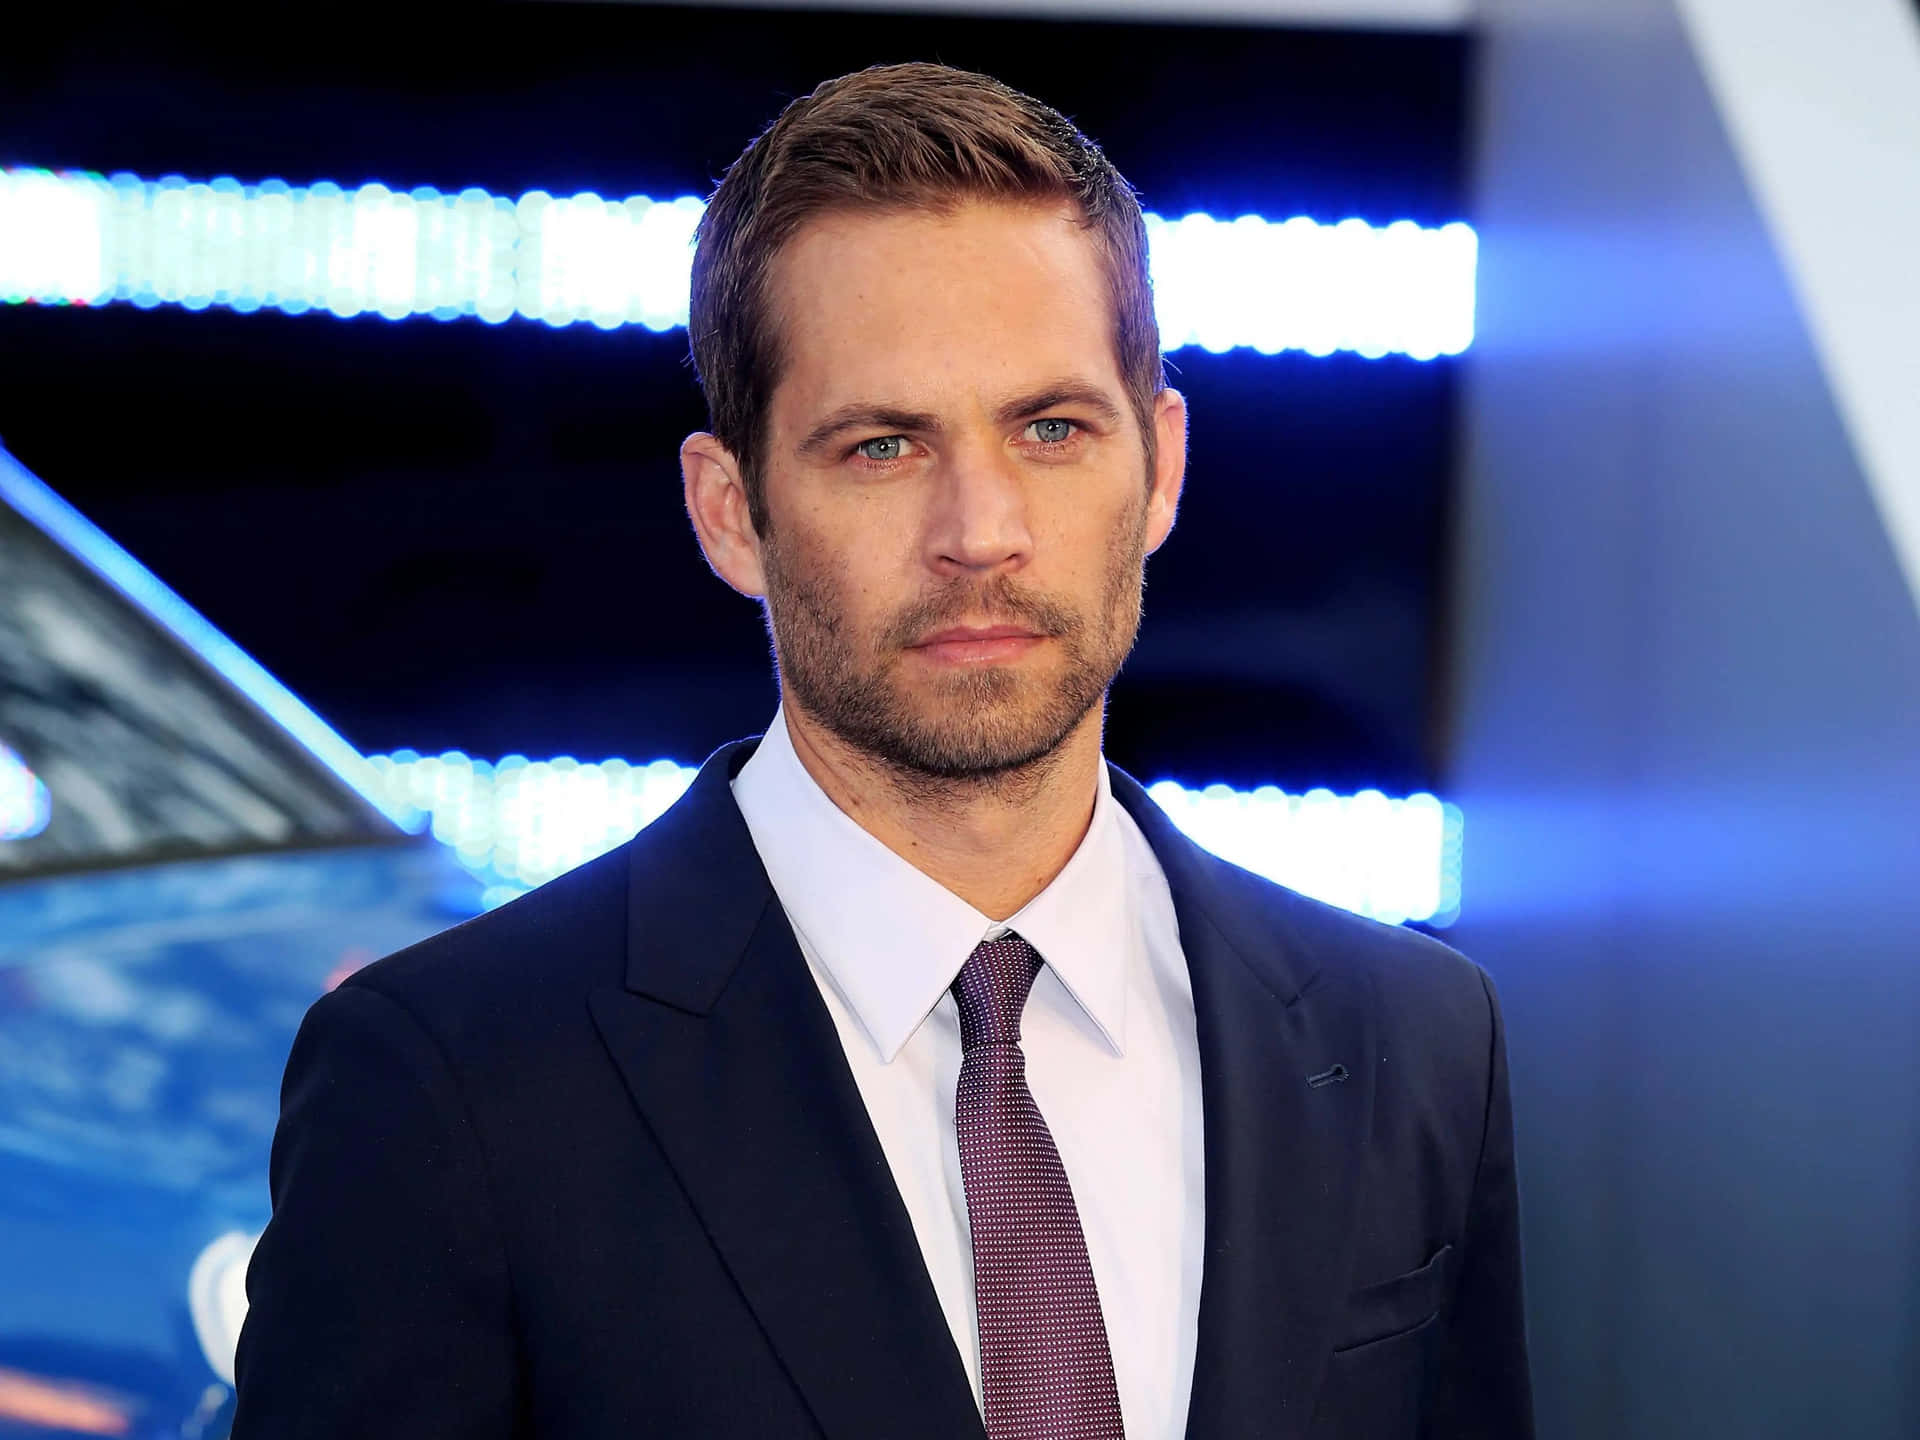 Remembering Paul Walker - a Legend and an Icon"